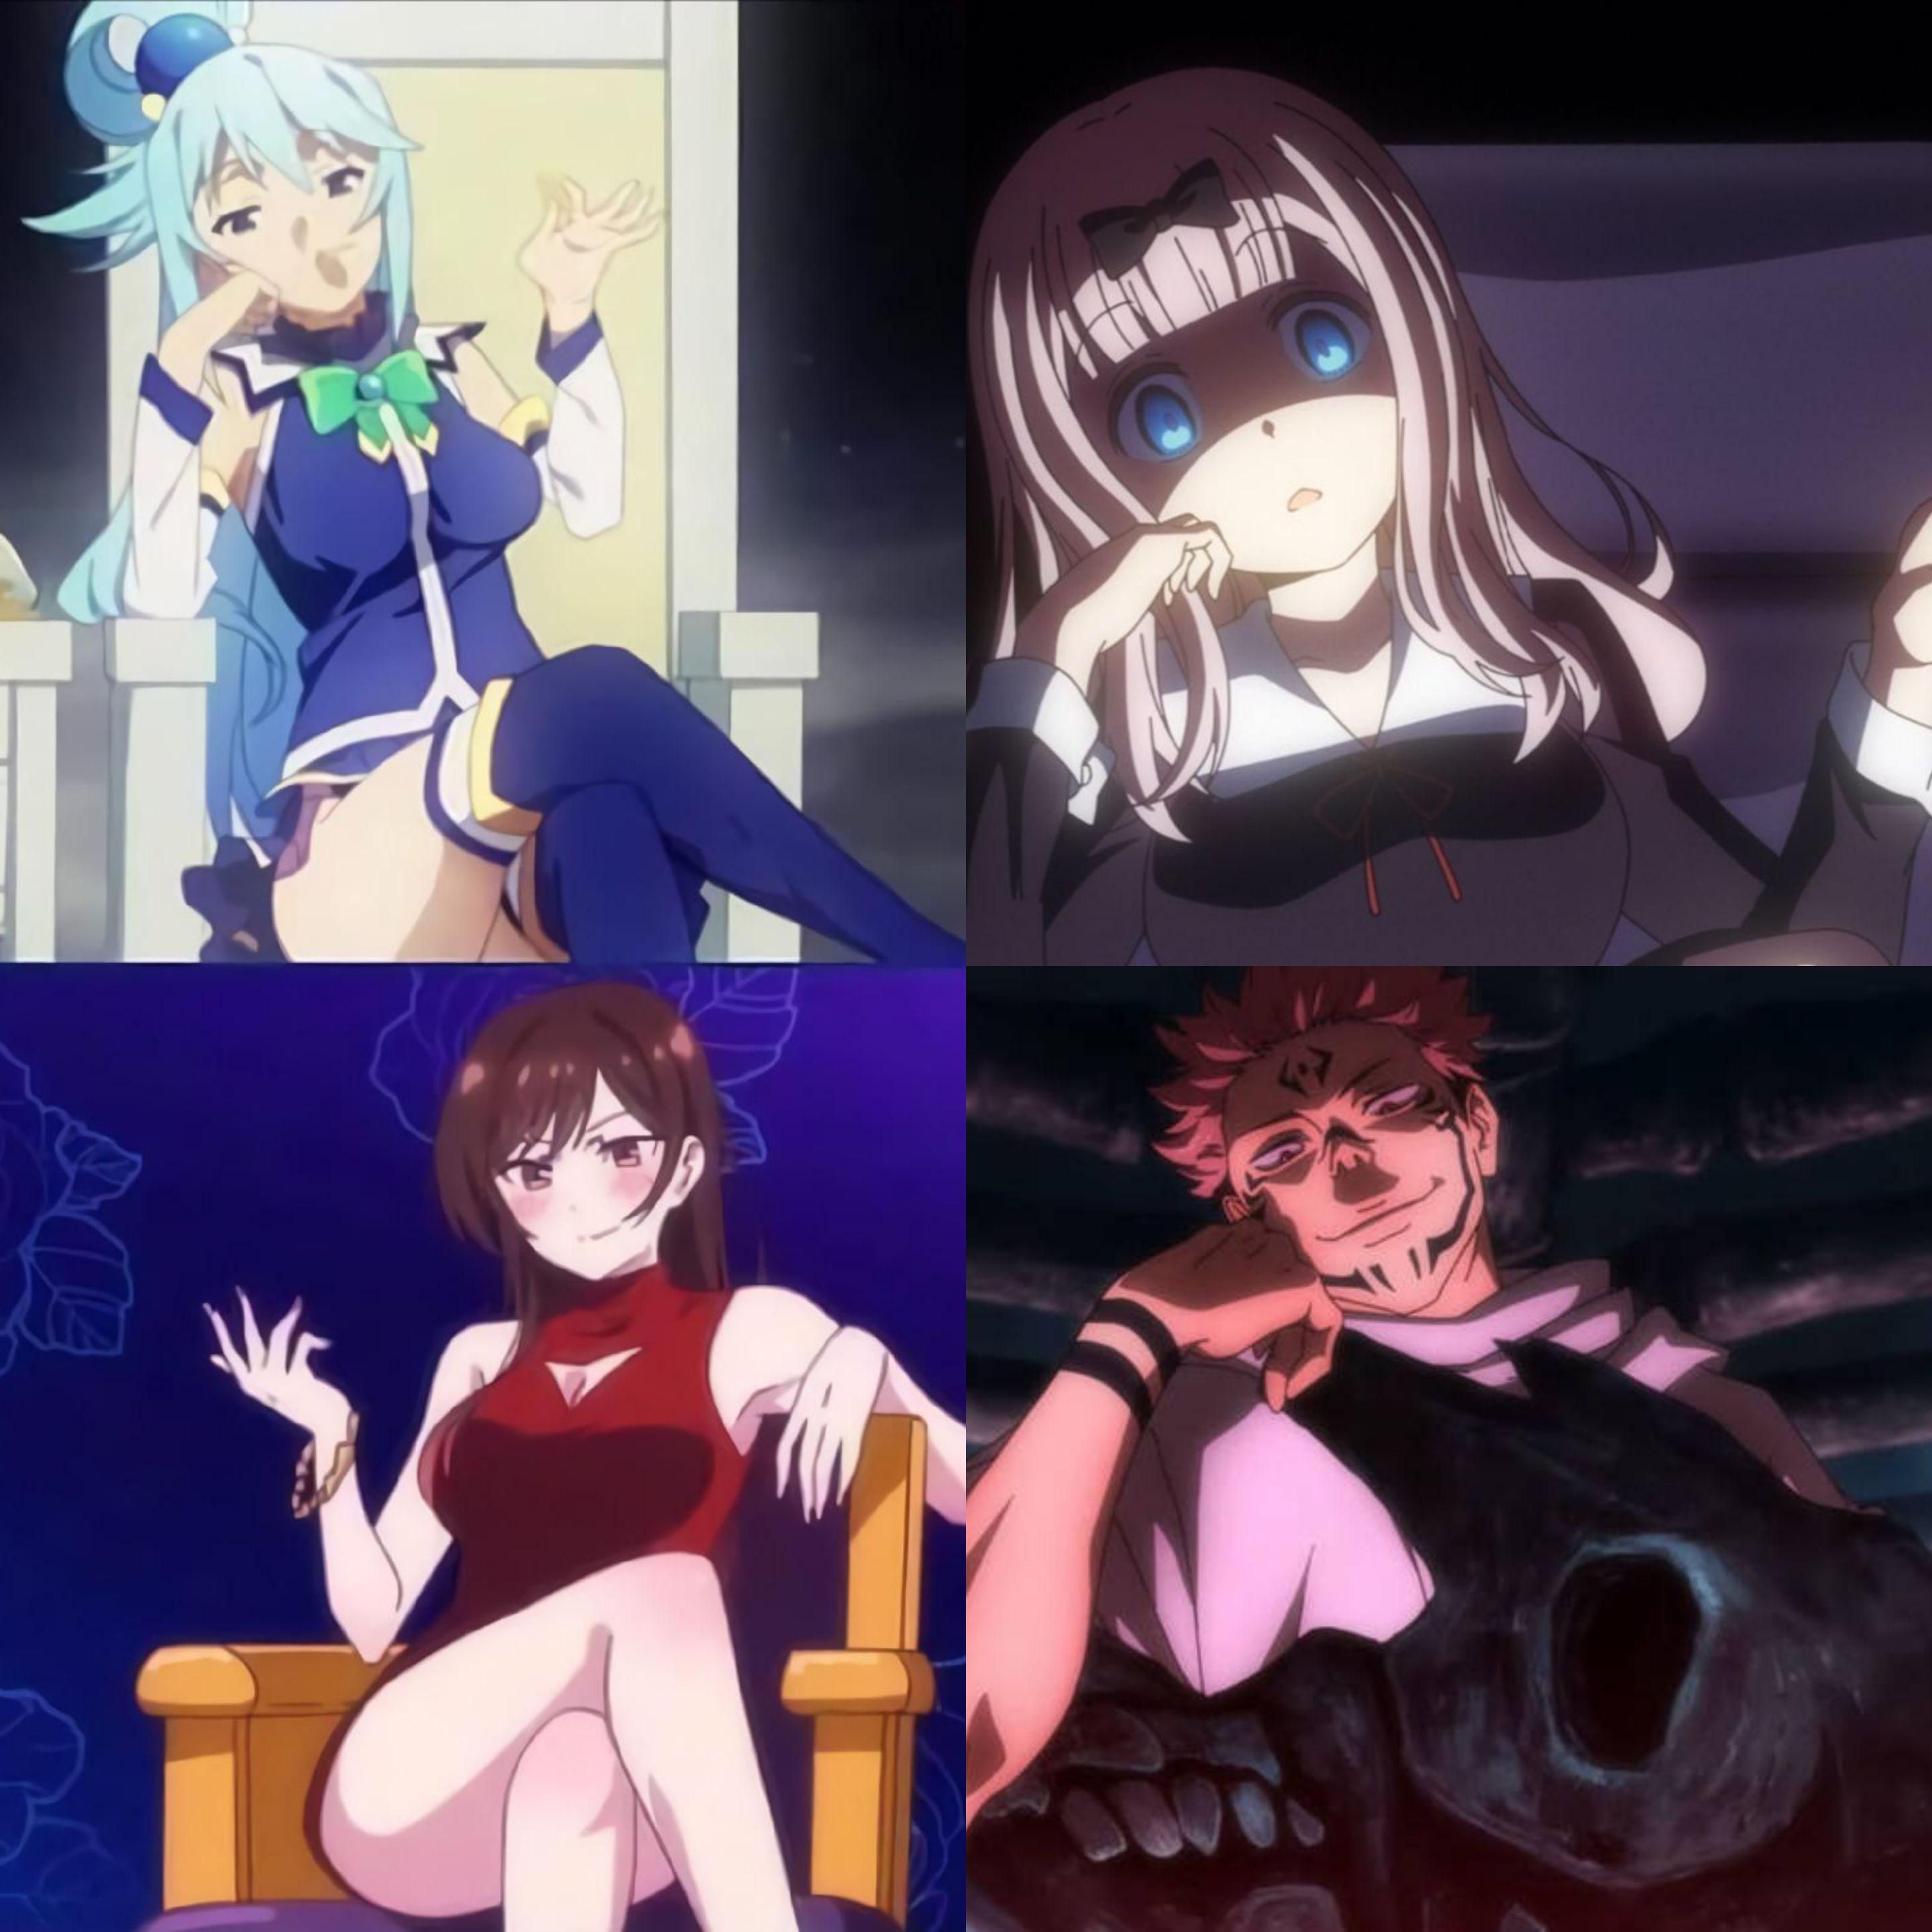 This is how Supreme Waifus sit.